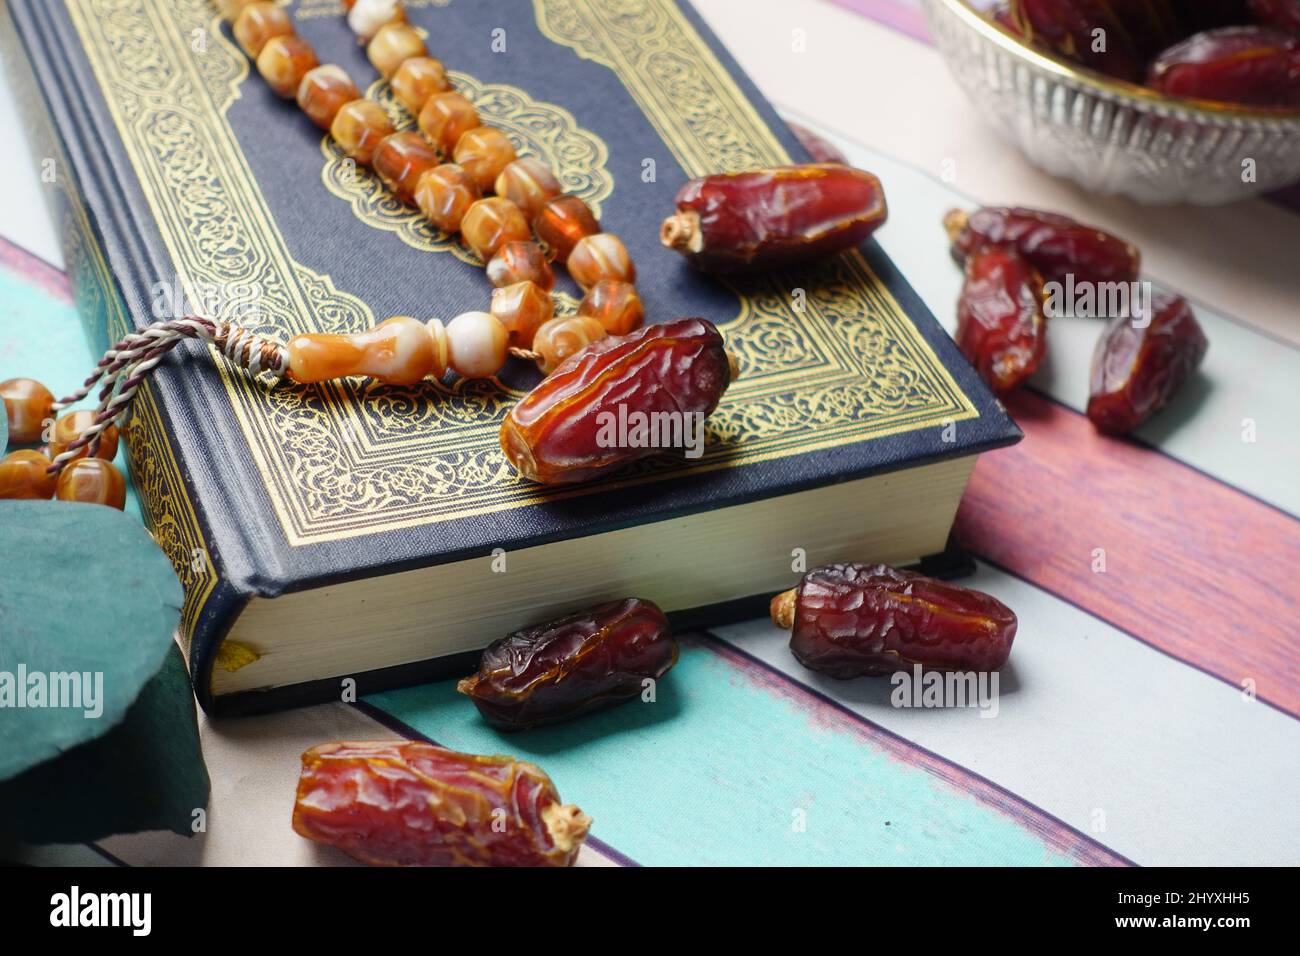 Holy book Quran and rosary on table, close up. Stock Photo